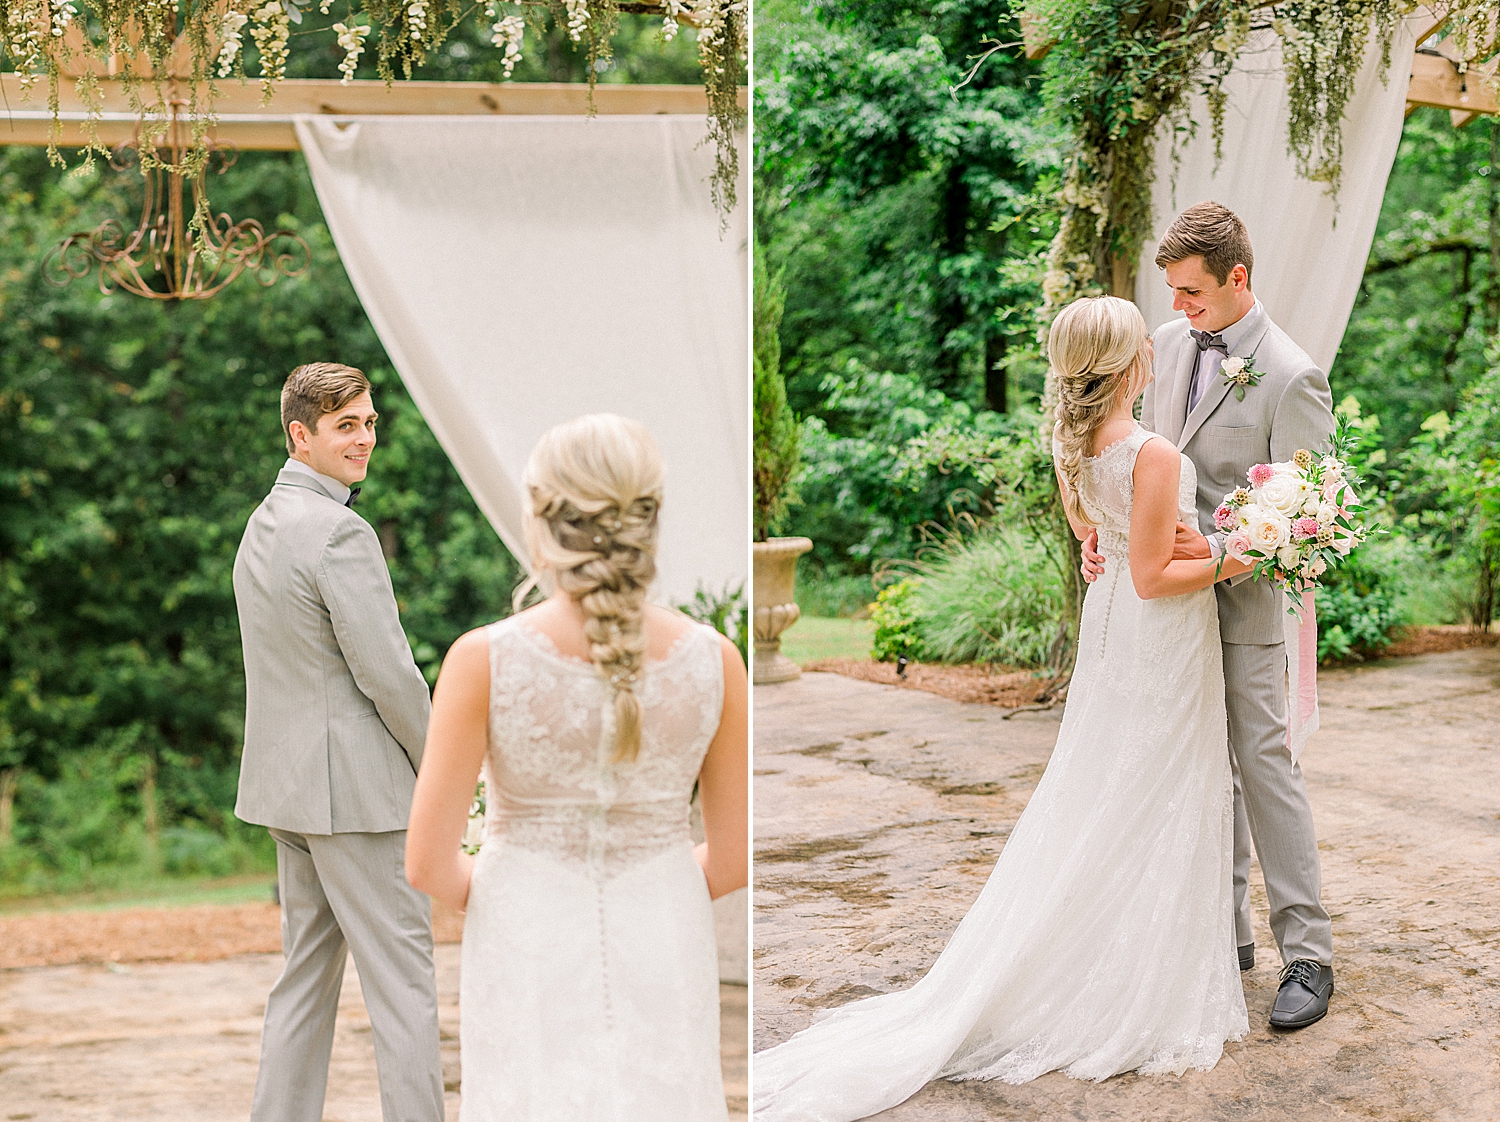 Creekside Meadows wedding day first look with pergola in backdrop